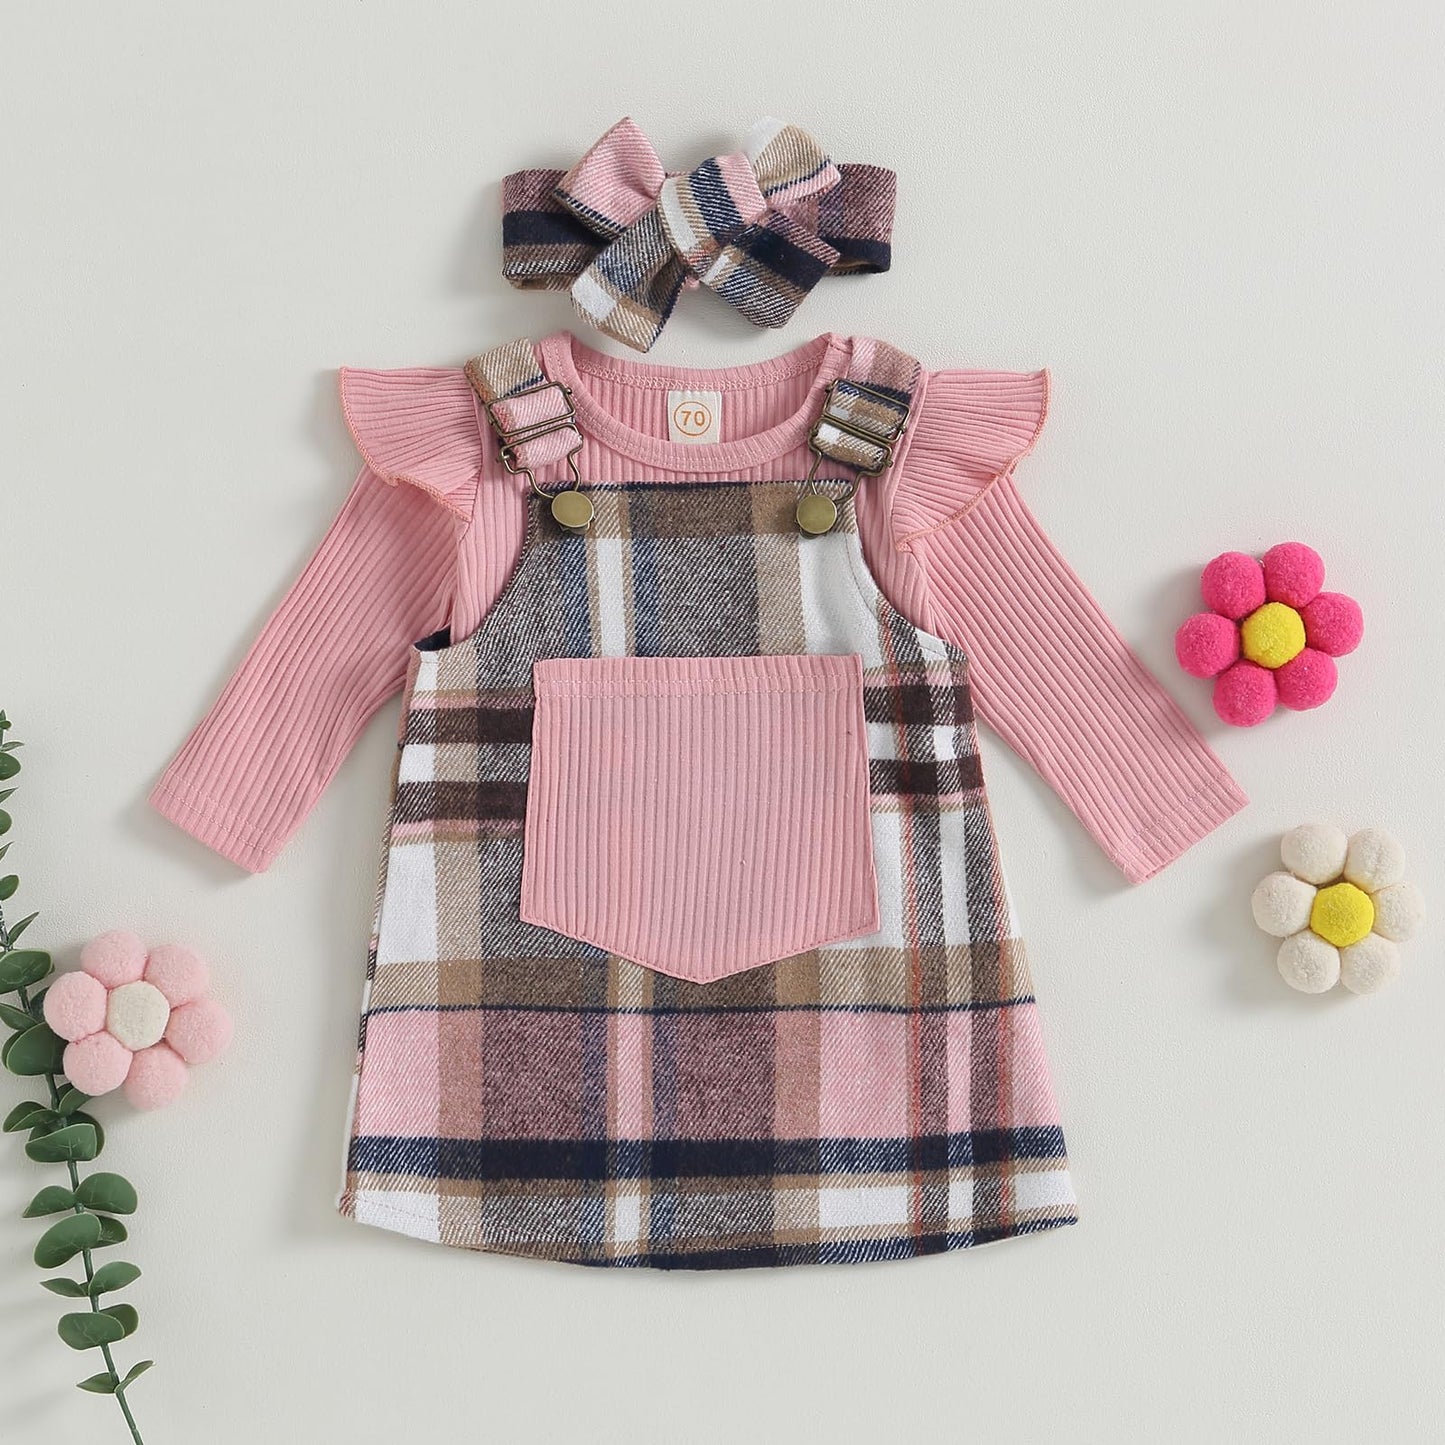 CREAIRY 3Pcs Baby Girl Clothes Knitted Long Sleeve Romper Bodysuit T-Shirt Tops Plaid Suspender Dress Skirt Set Fall Outfits, for 0-3 Months